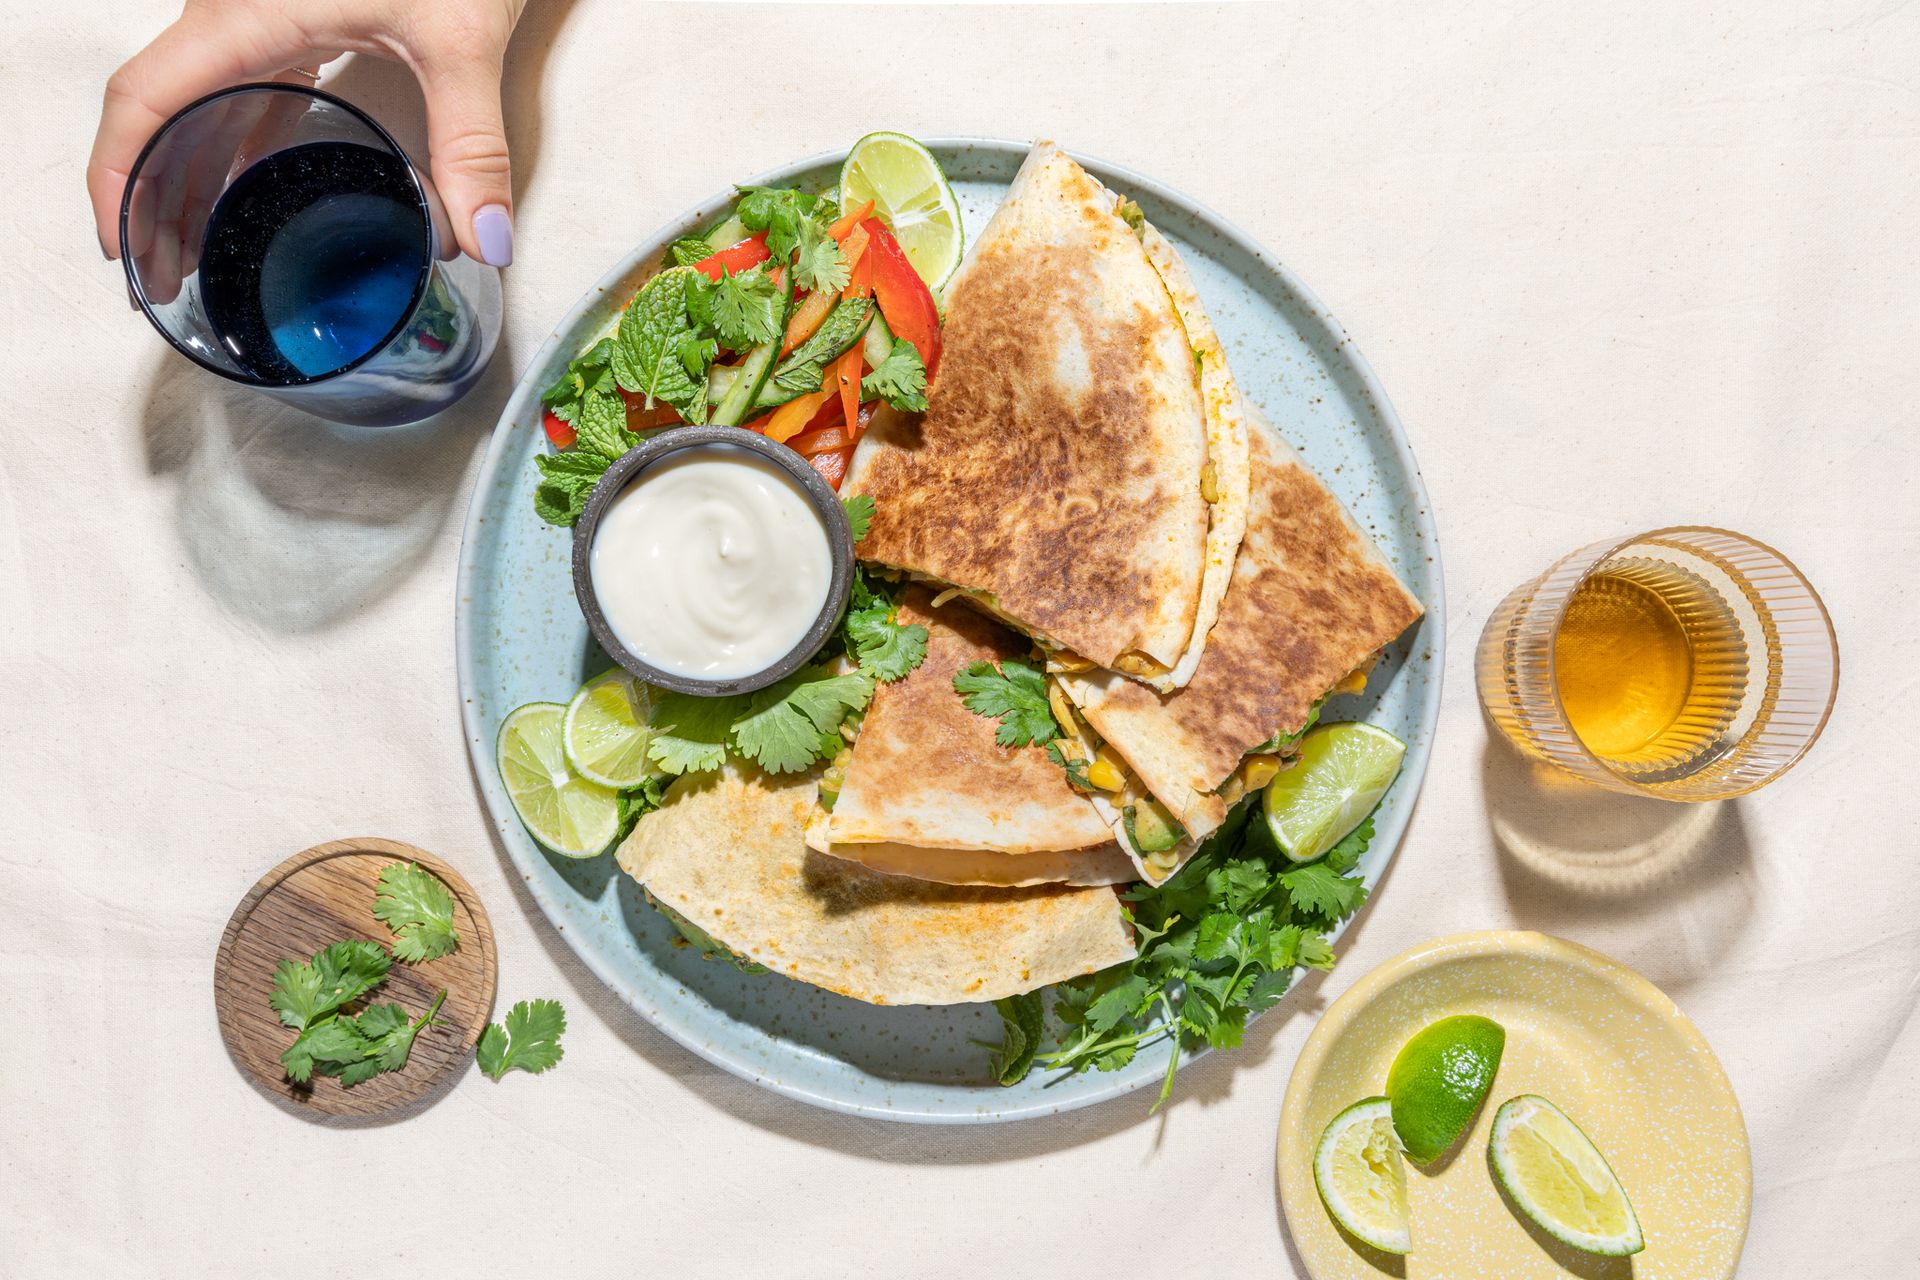 Chicken and cheddar quesadillas with salad